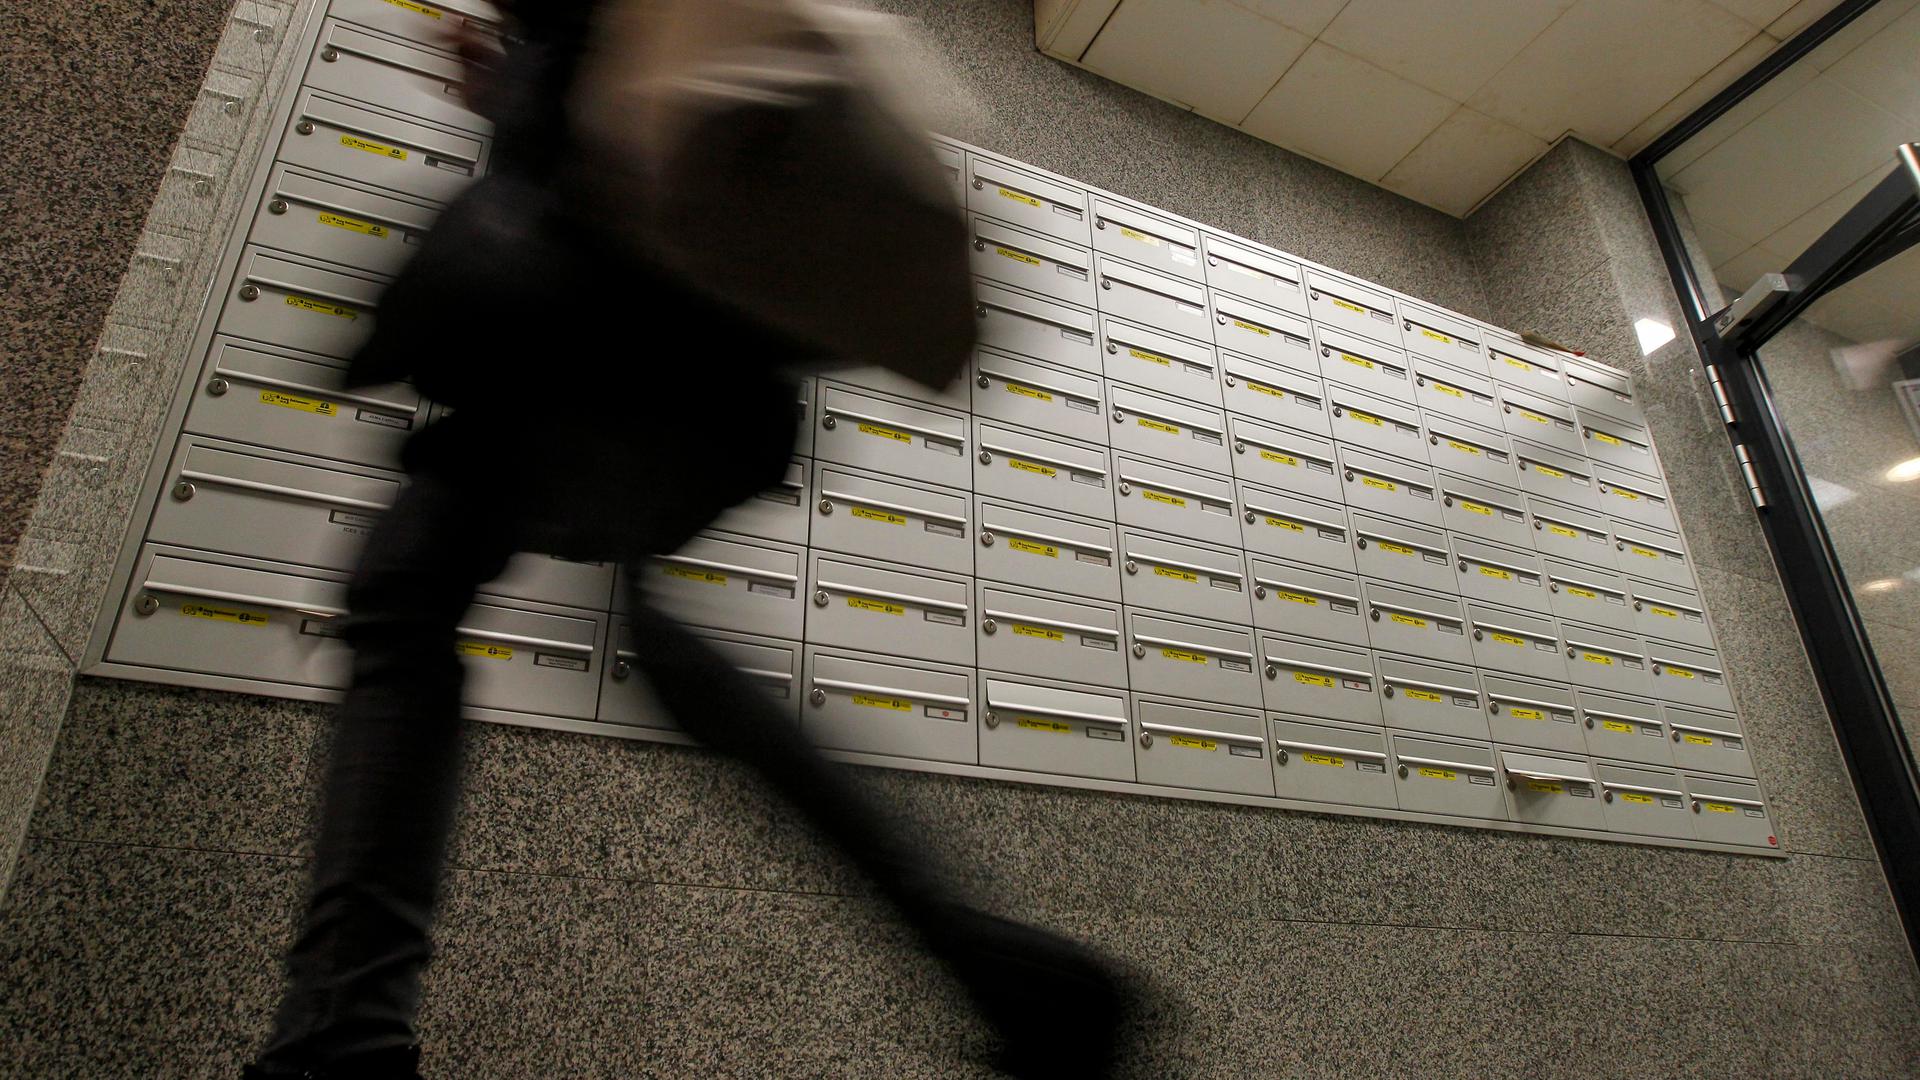 A man walks past a large number of letter boxes in this archive photo.